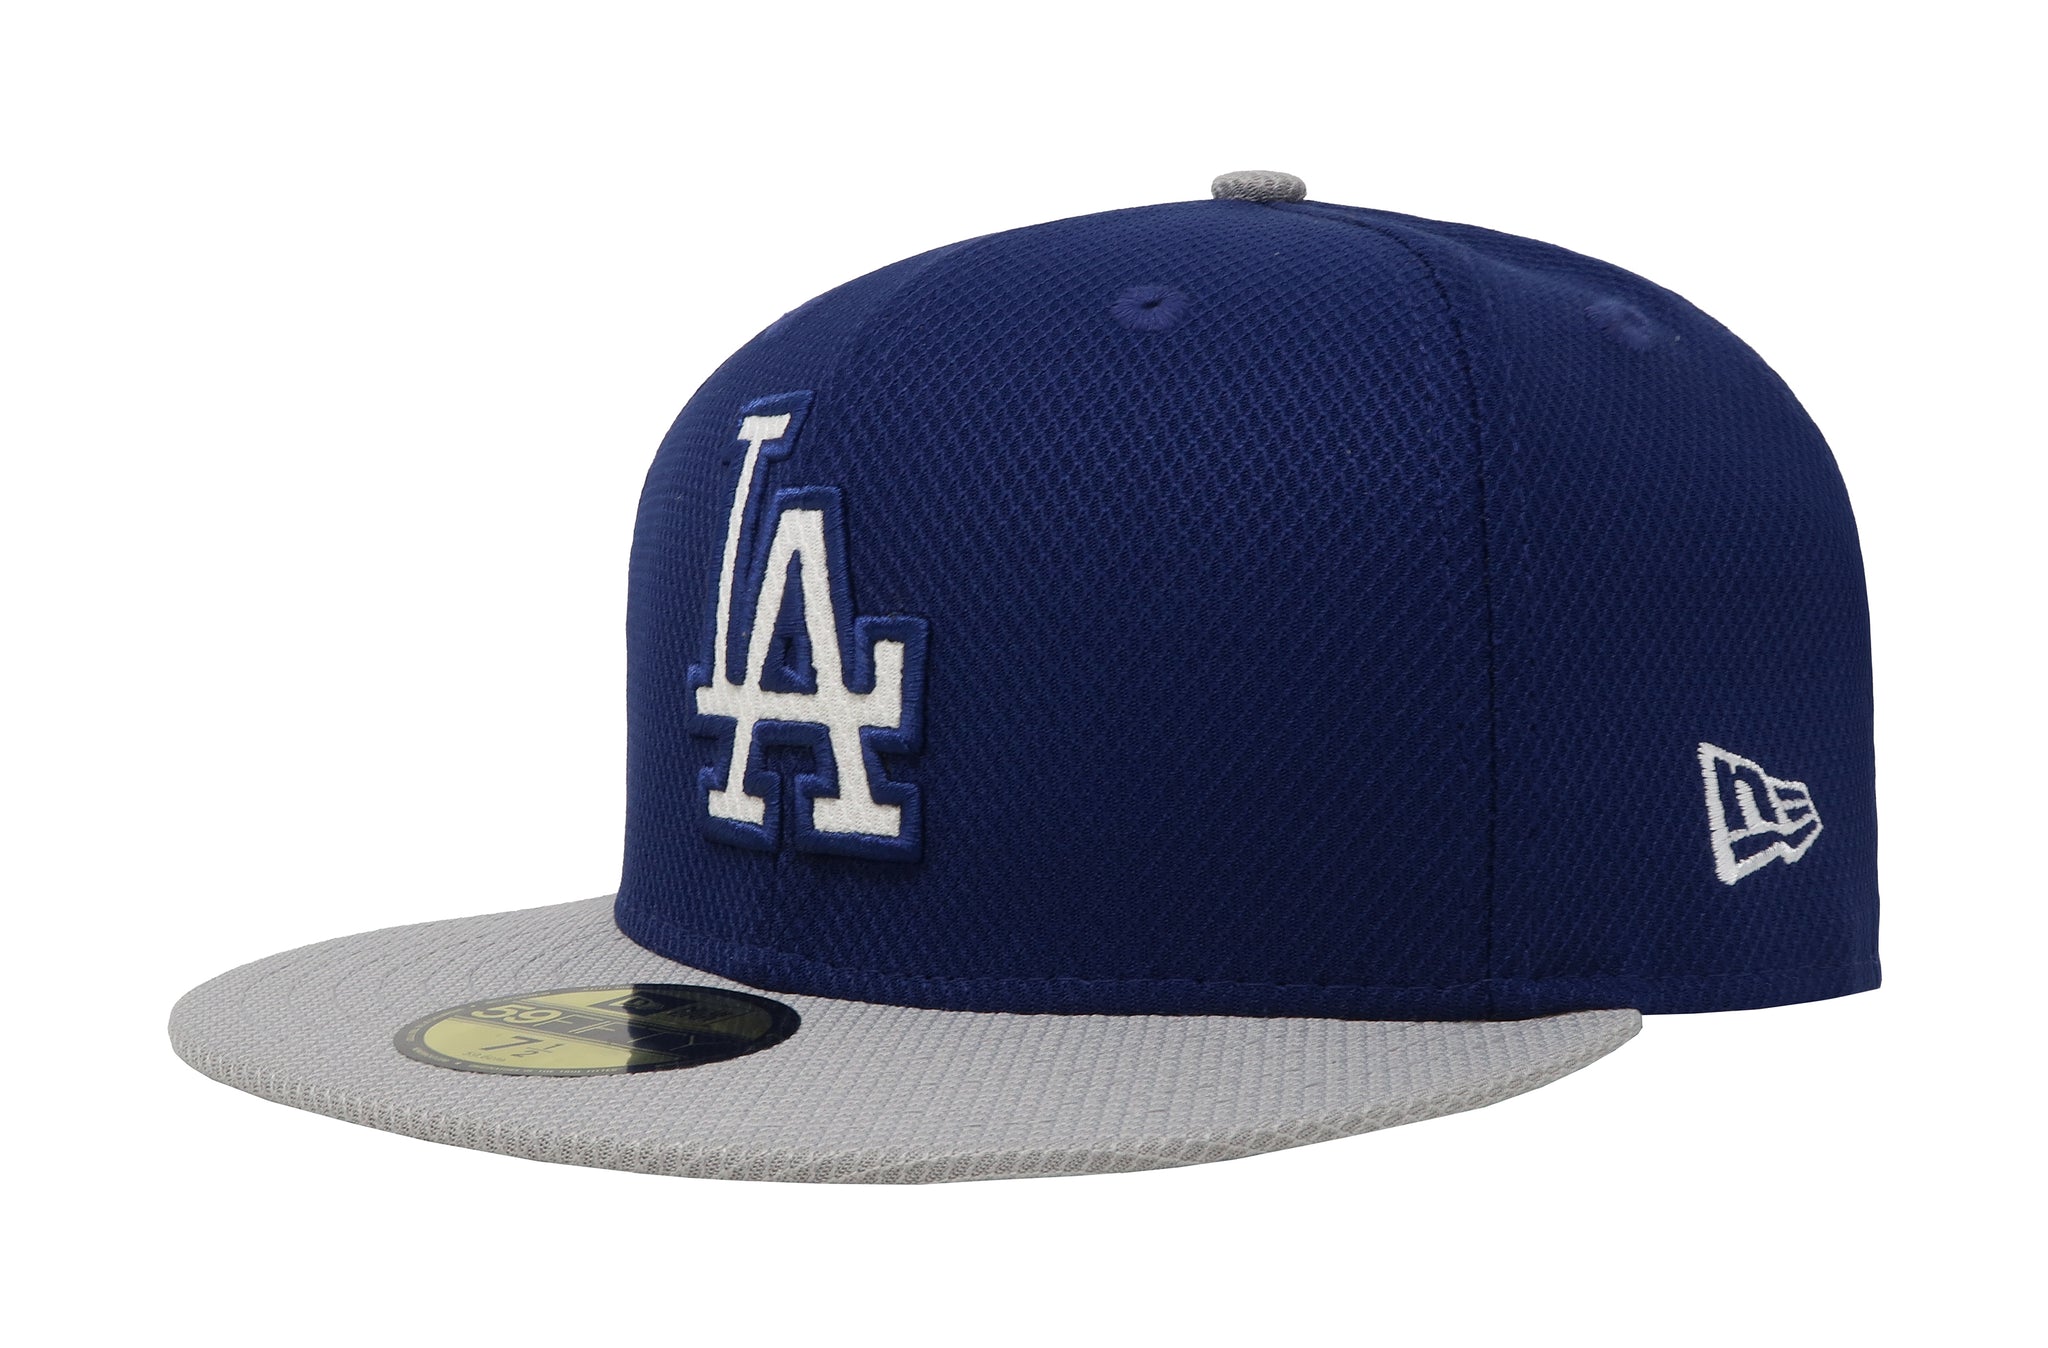 Men's New Era Royal Los Angeles Dodgers 59FIFTY Fitted Hat